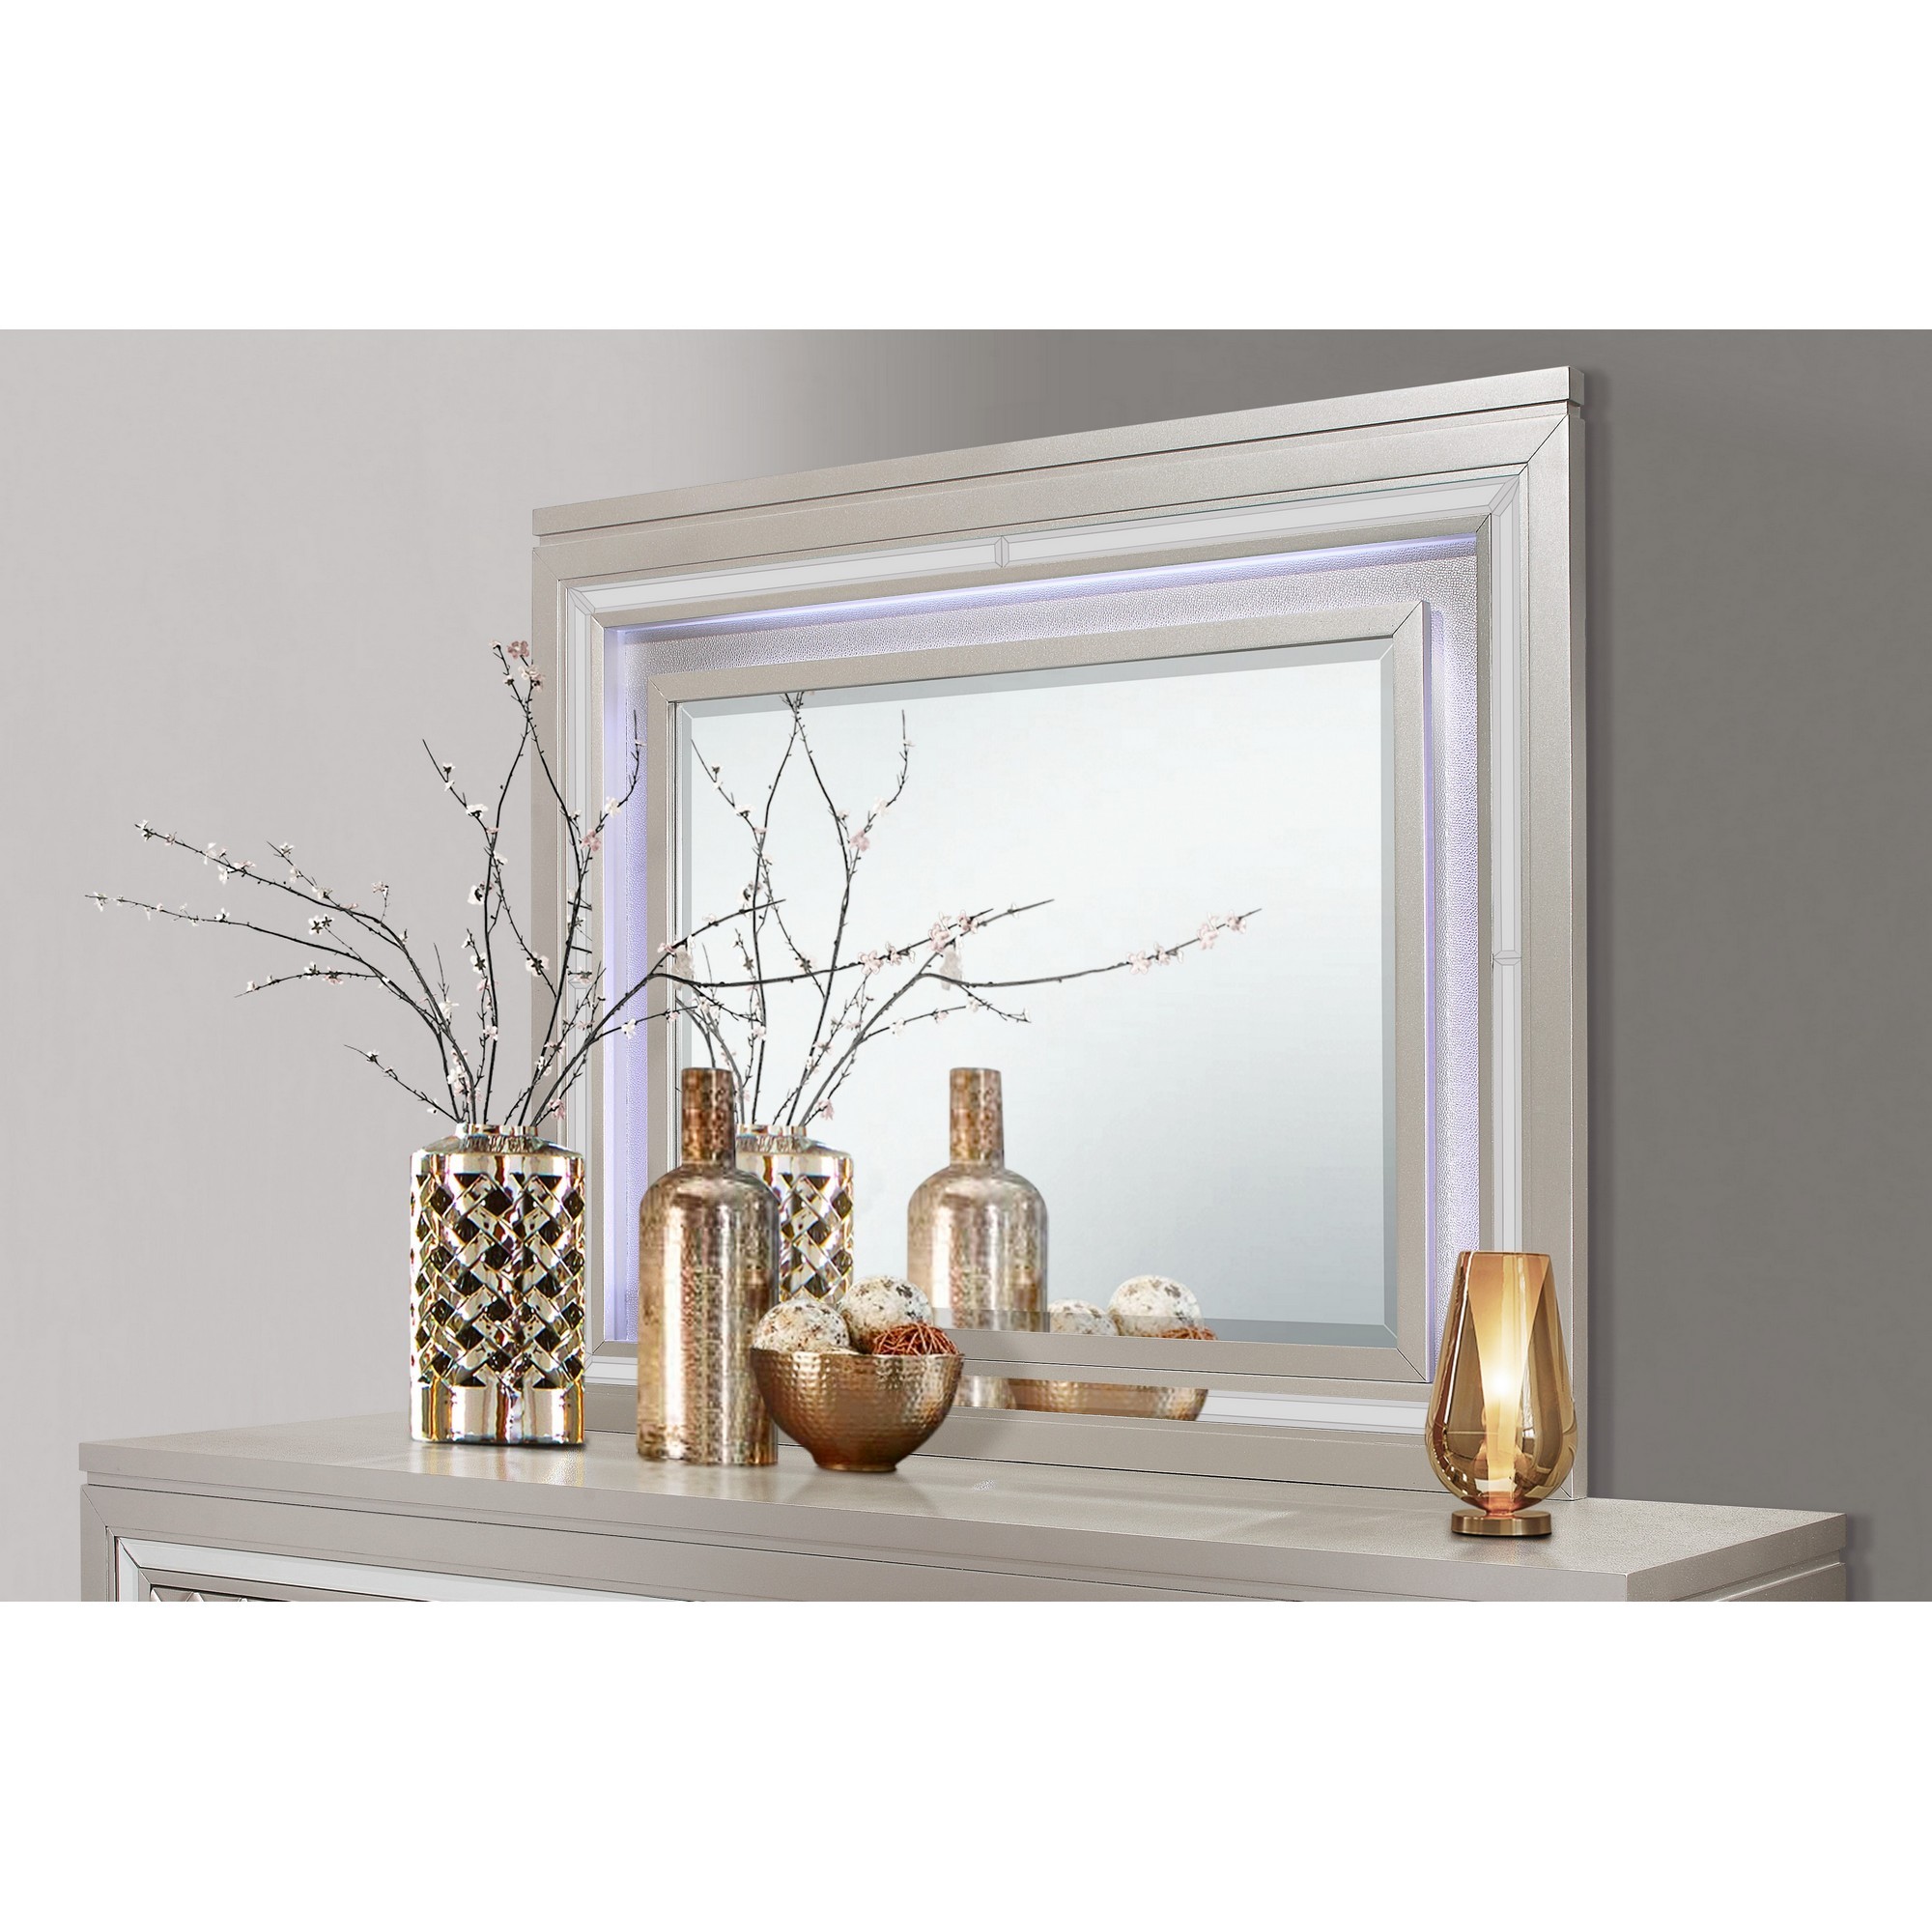 Champagne Toned Mirror Frame with a lovely Mirrored Accents